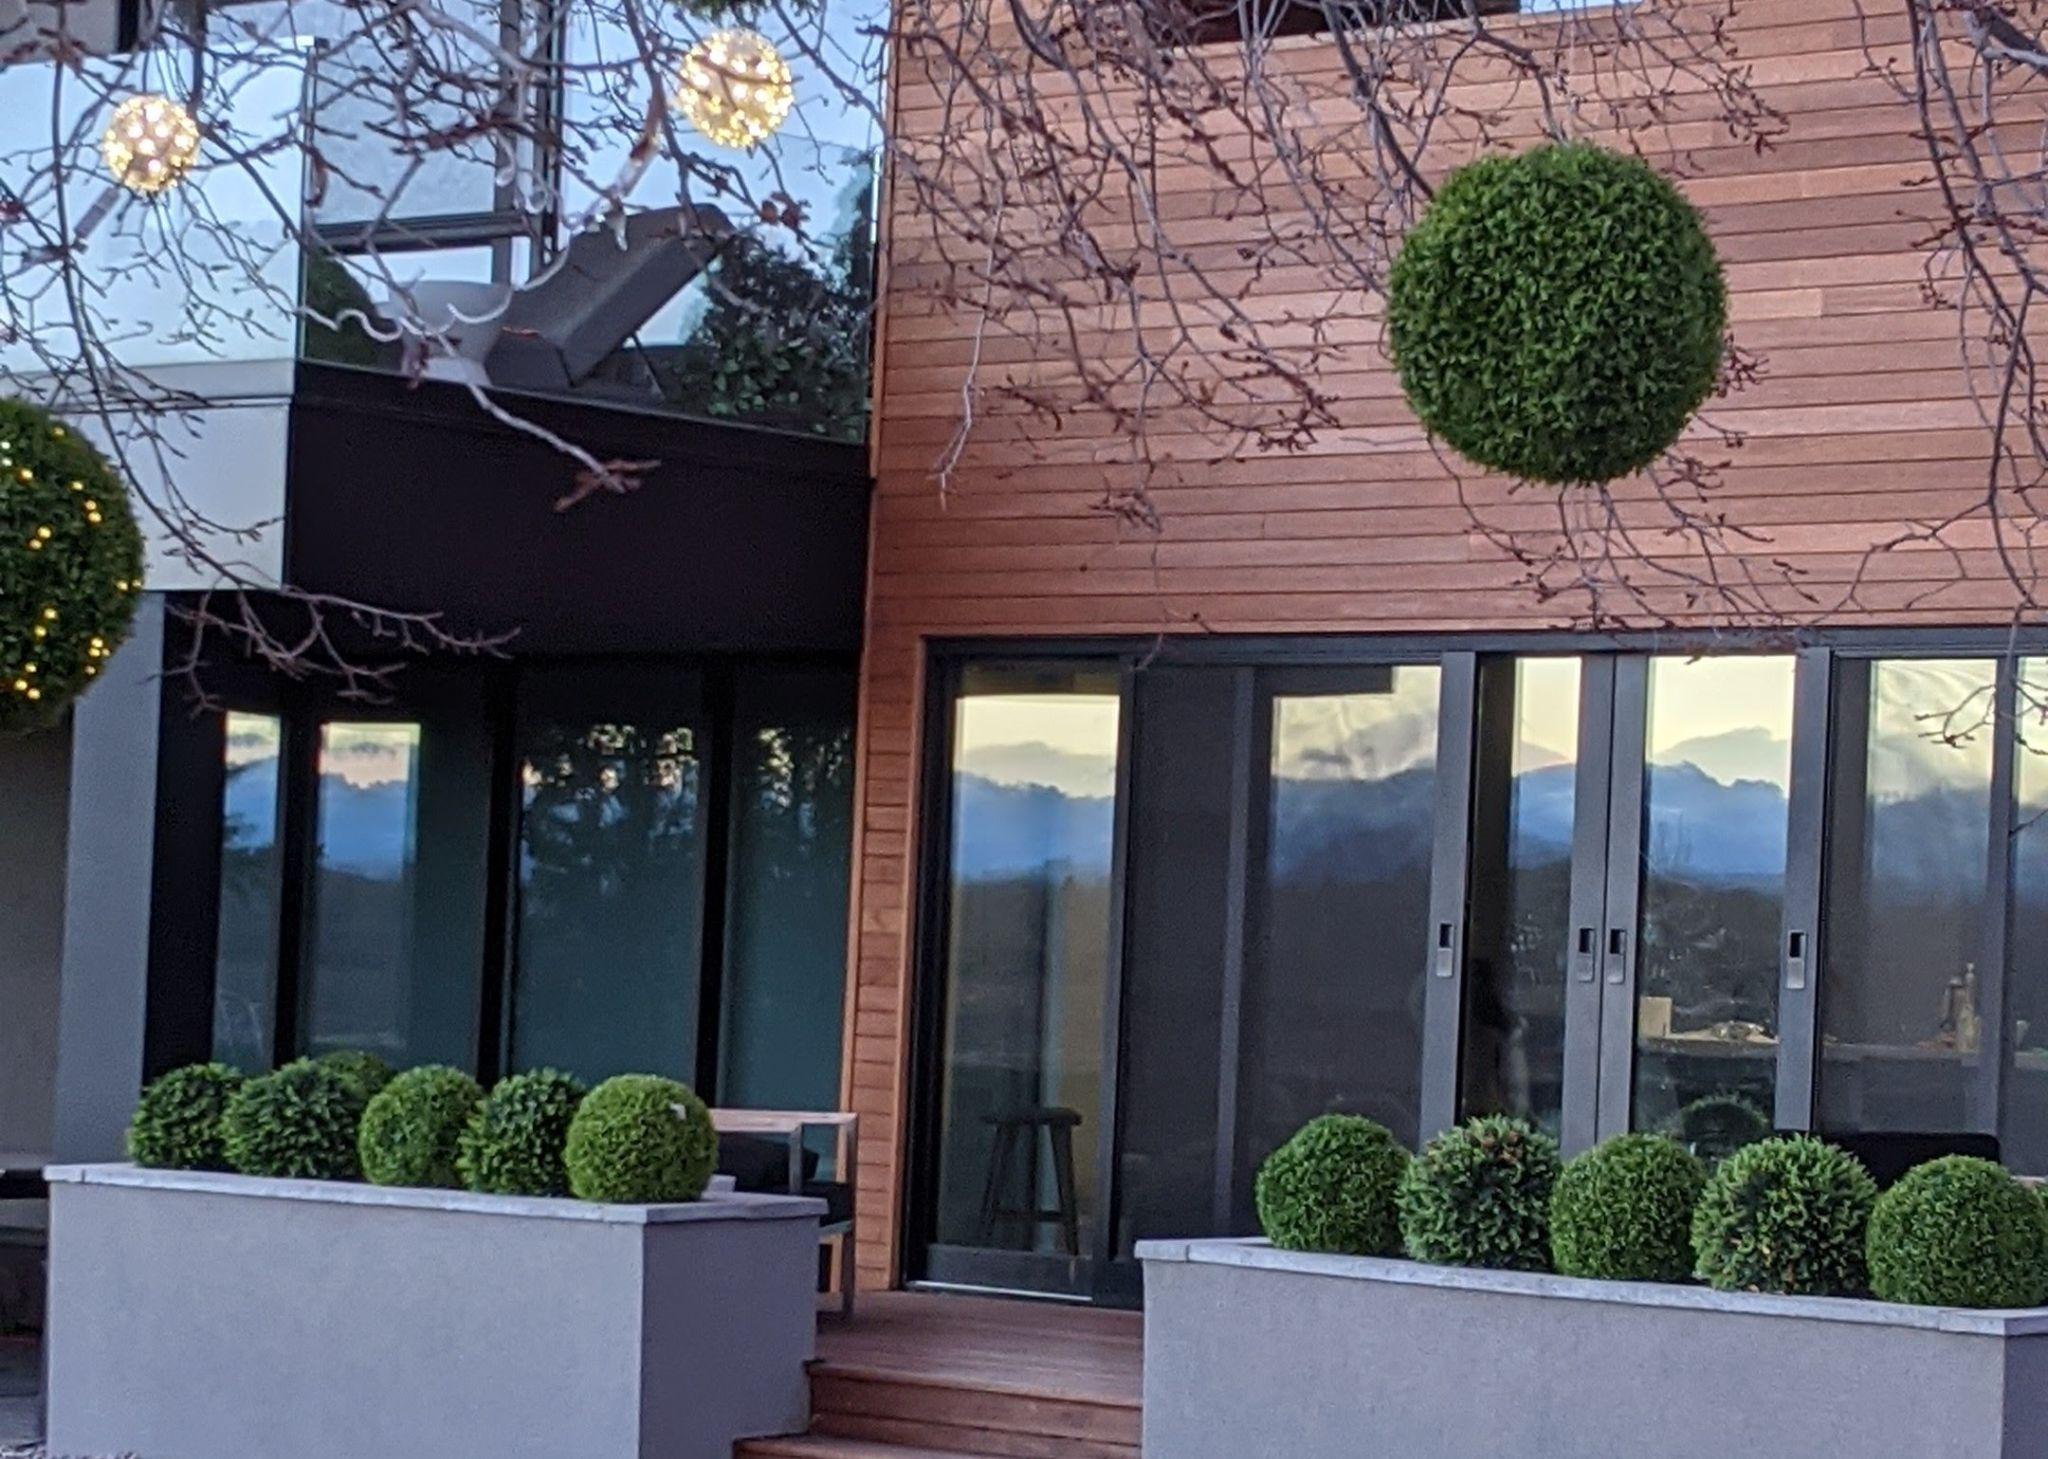 Creative Placement: Where to Put Your Topiary Balls